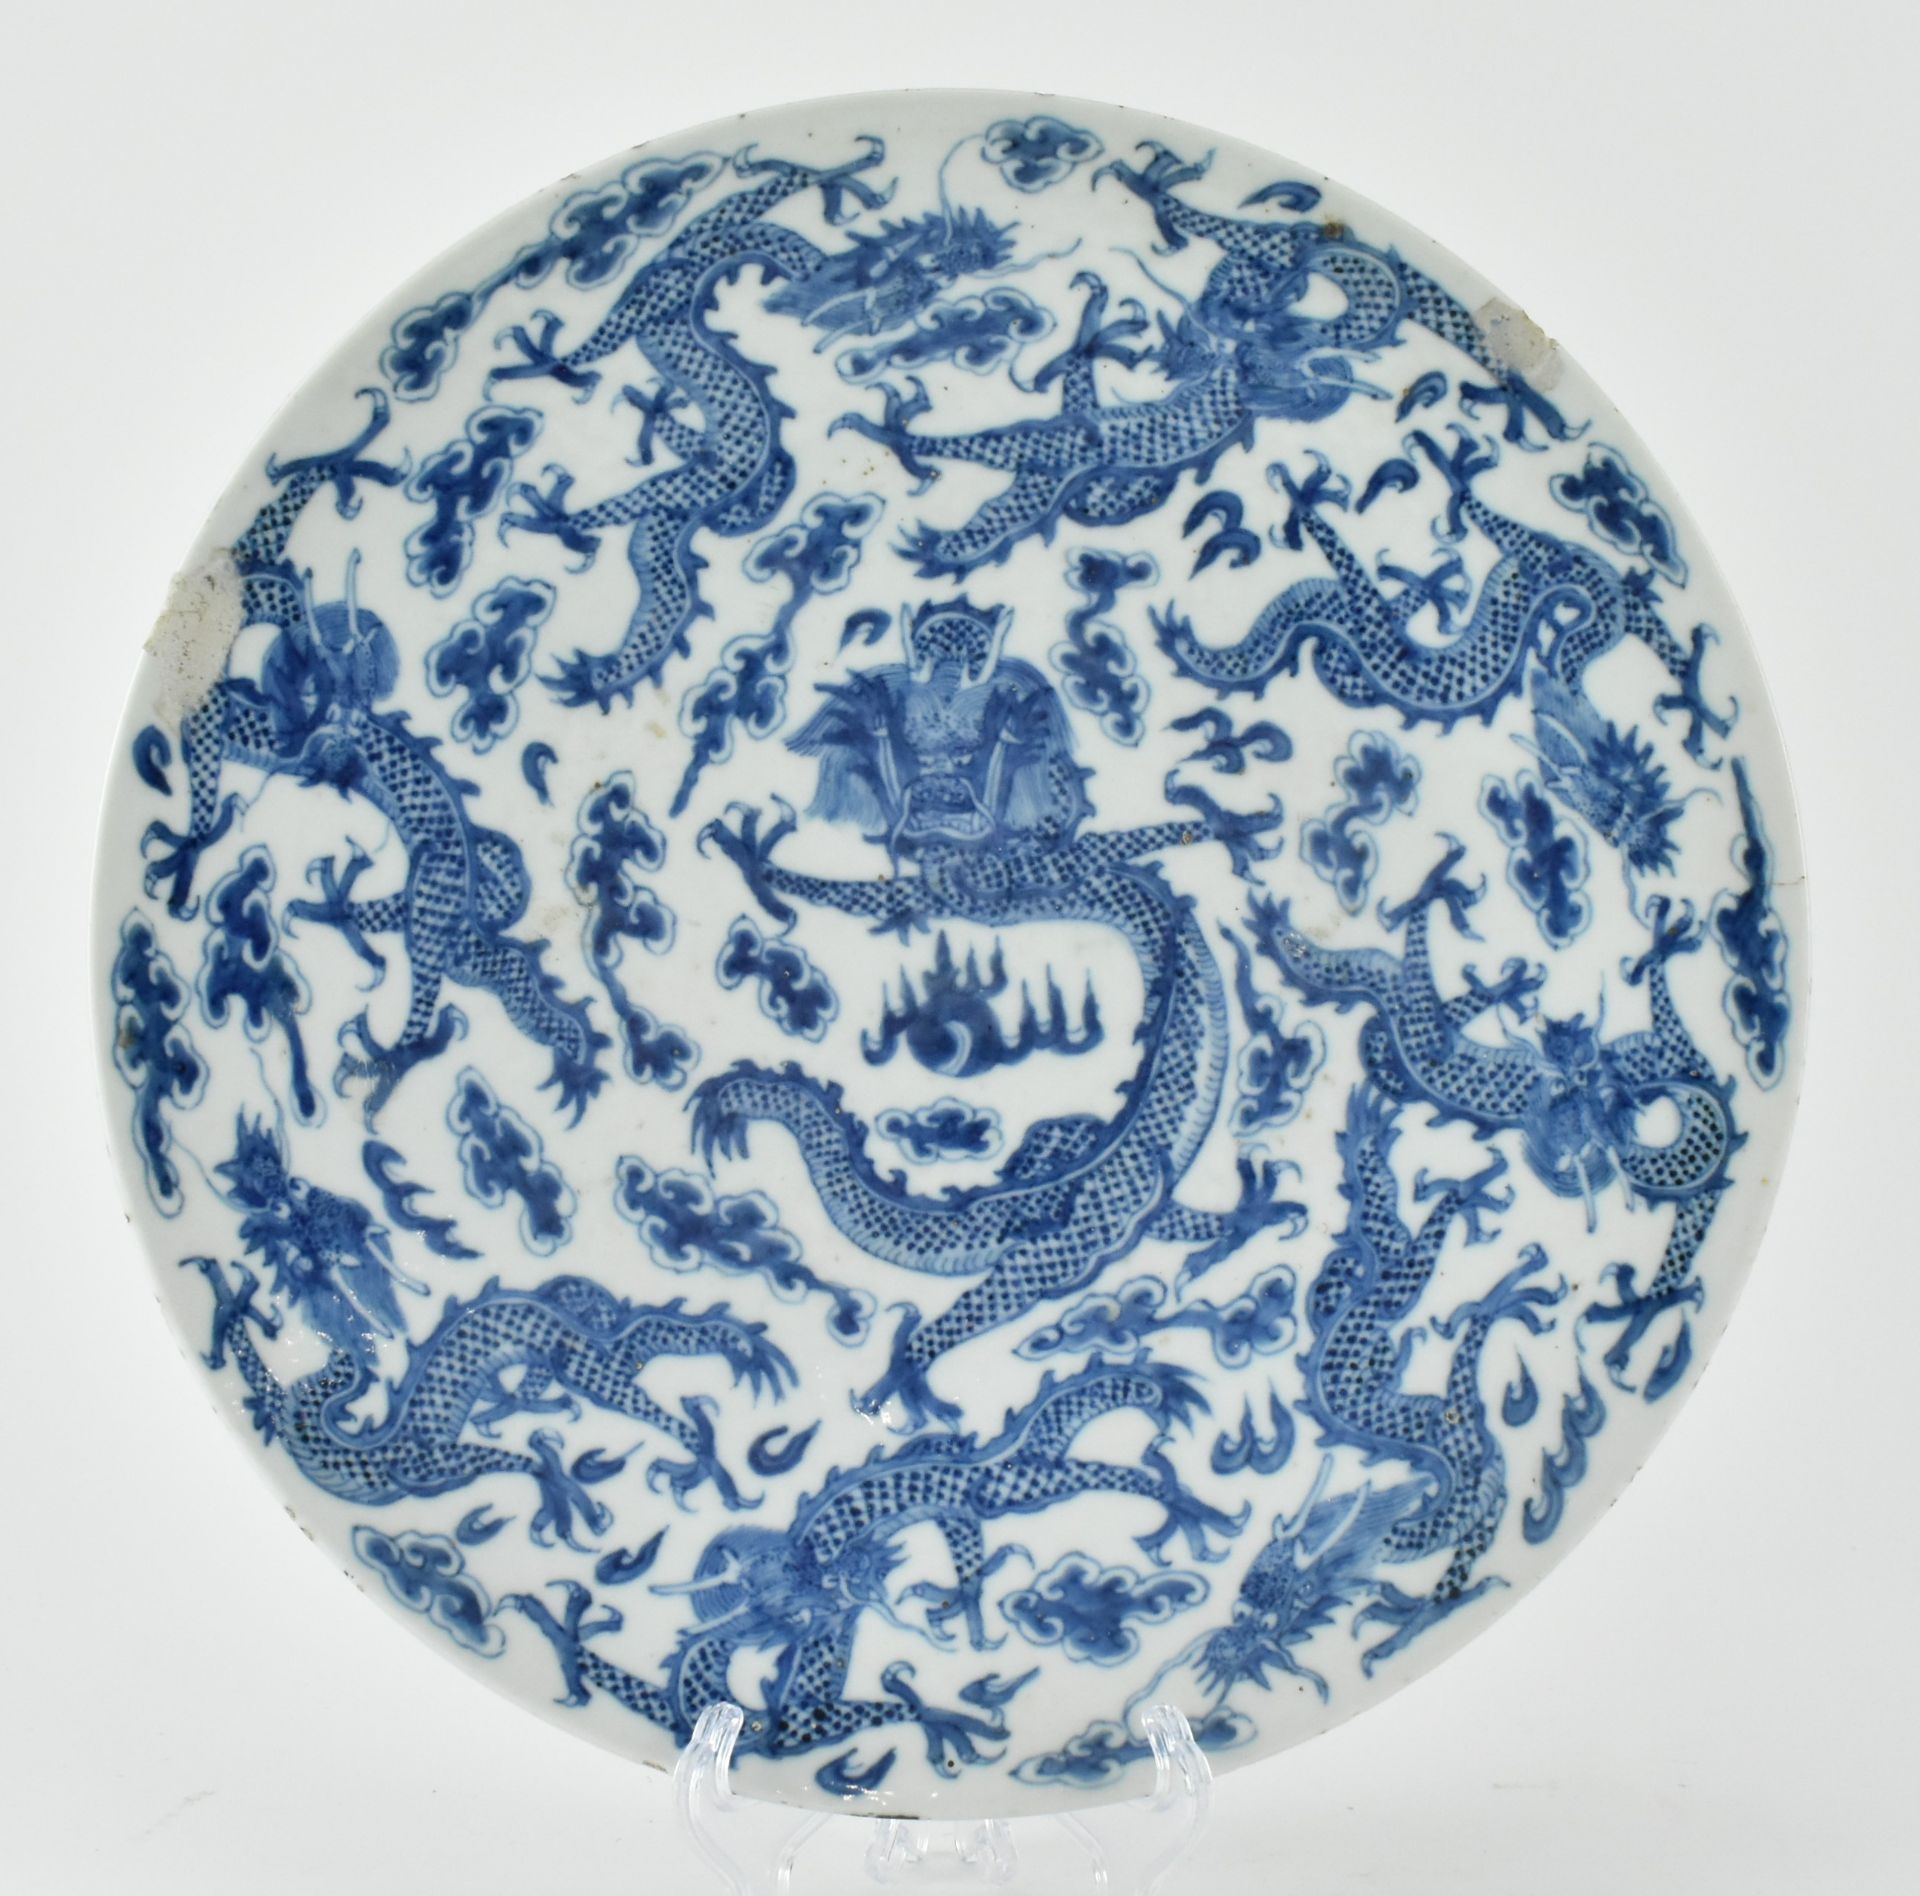 BLUE AND WHITE NINE DRAGON CHARGER, CHENGHUA MARKED